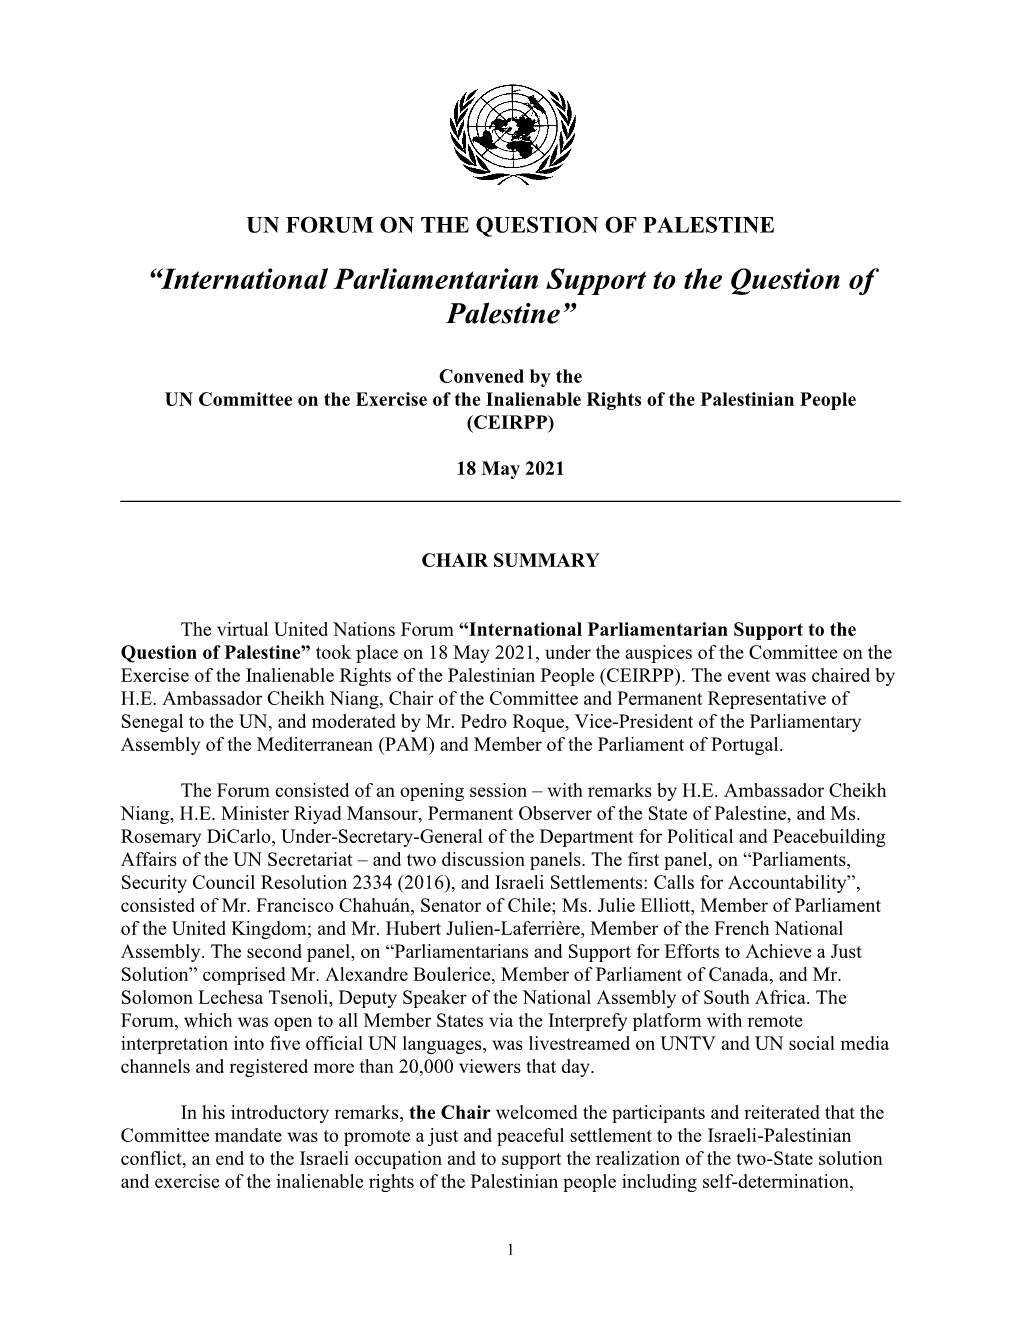 “International Parliamentarian Support to the Question of Palestine”